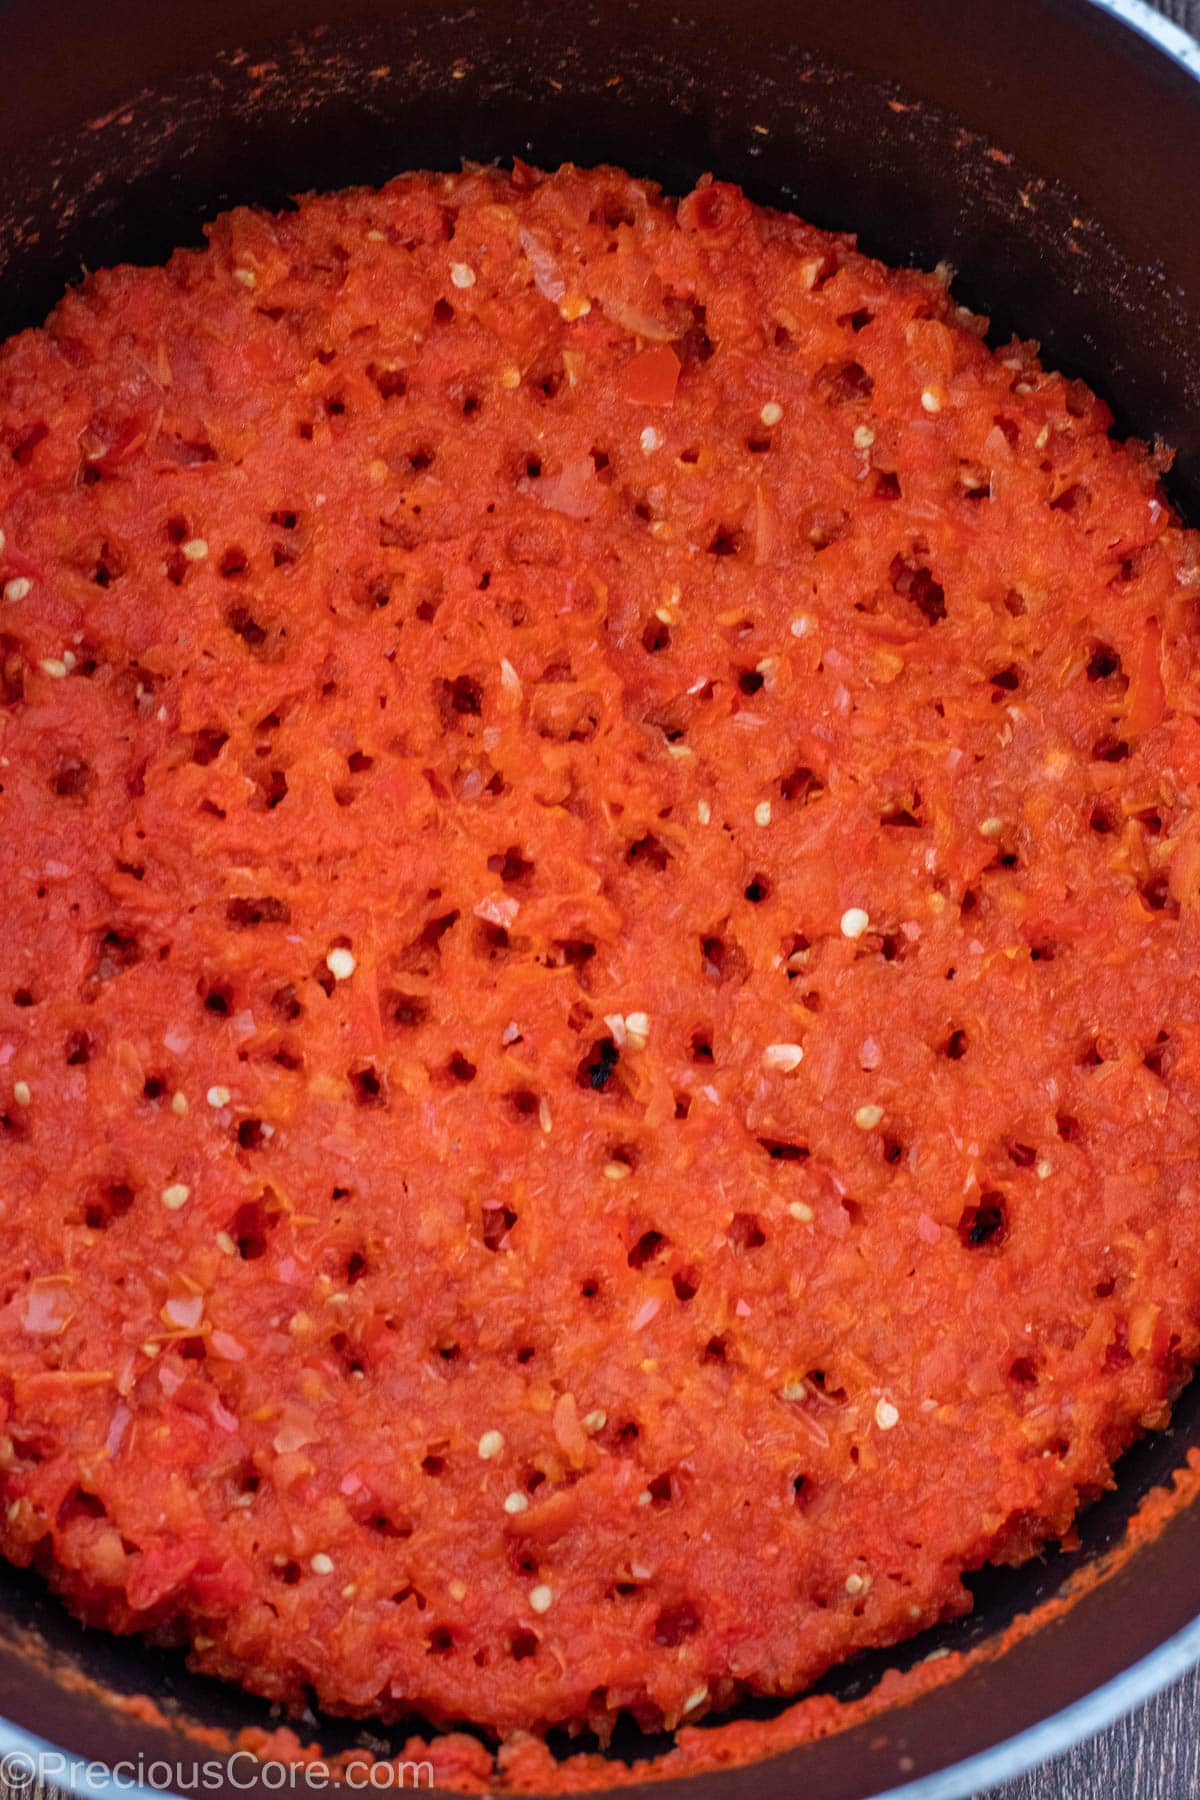 A pot of a tomato-pepper-onion blend that has been cooked down until reduced.